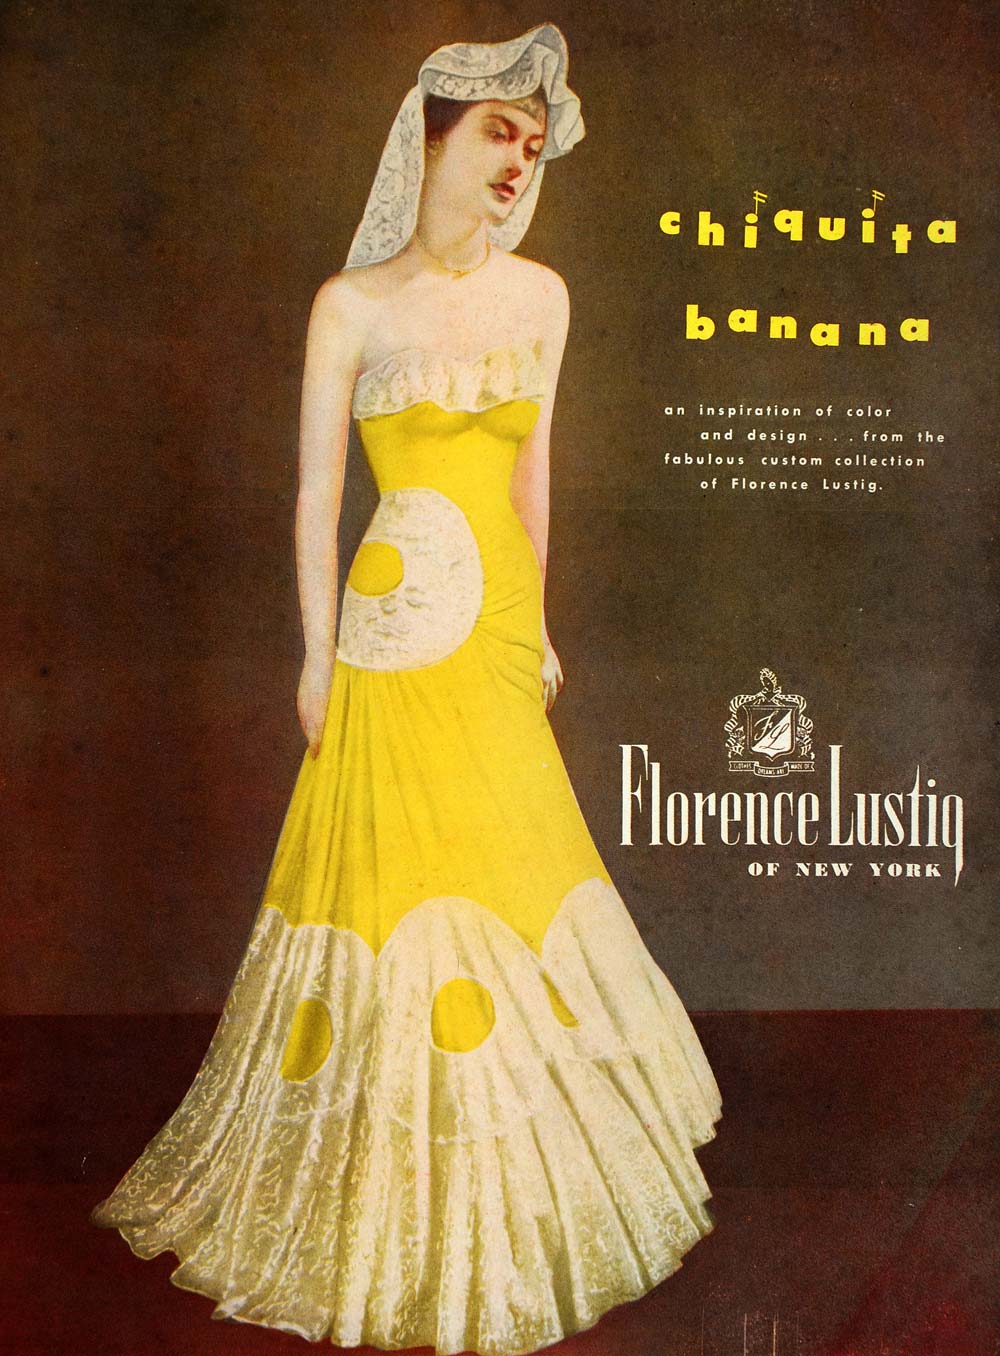 1948 Ad Florence Lustig Fashion Designer Vintage Yellow Evening Gown Clothing